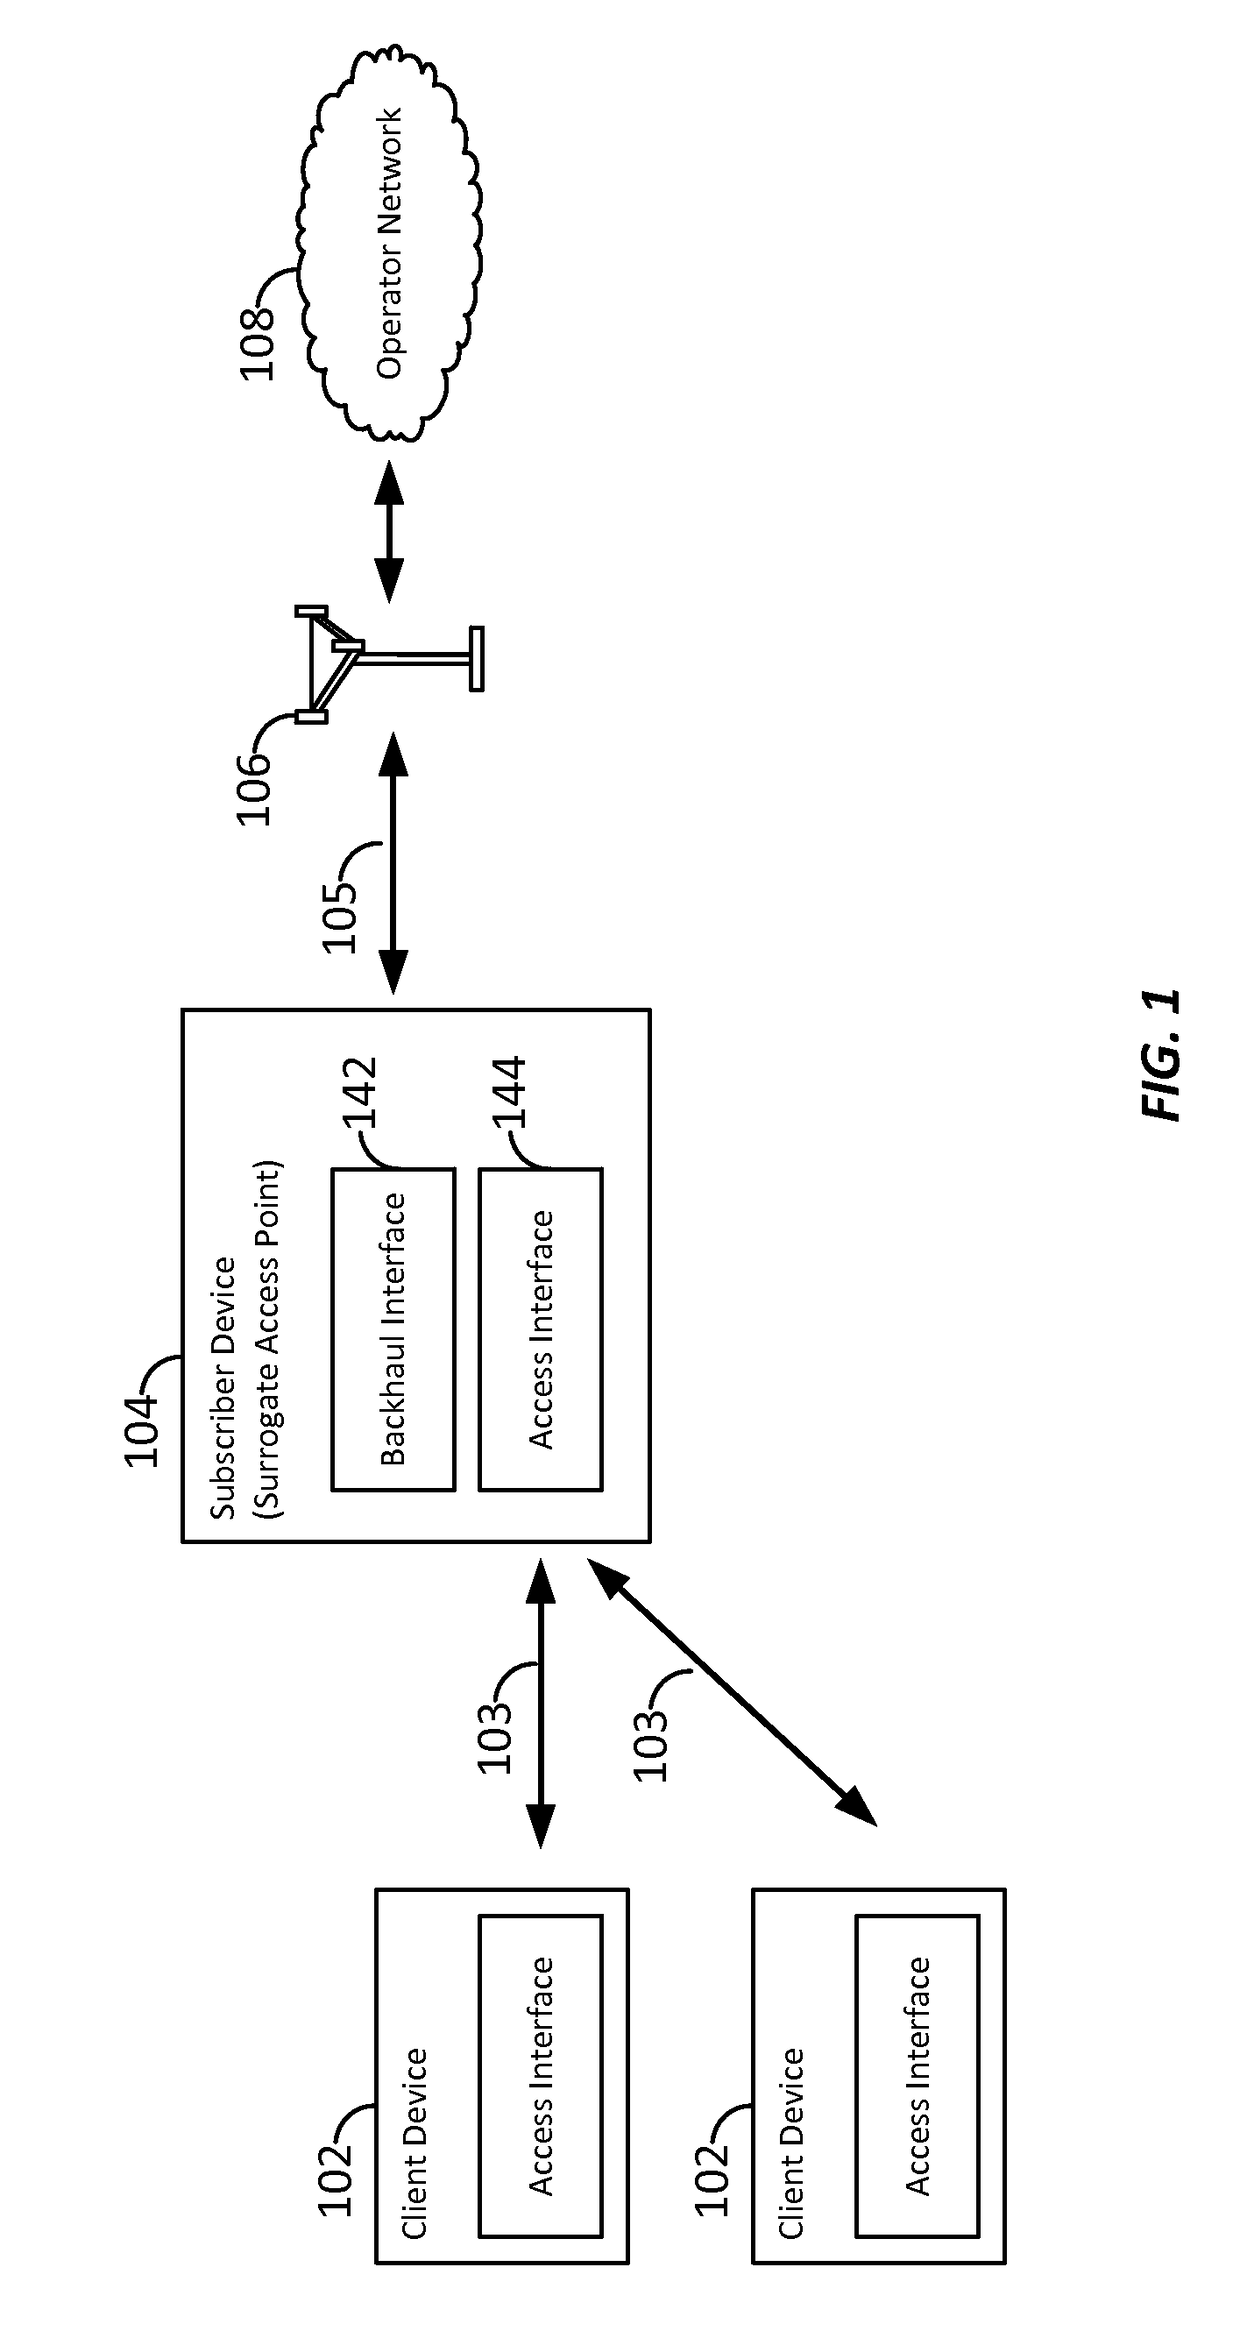 Peer-enabled network access extension using yield management